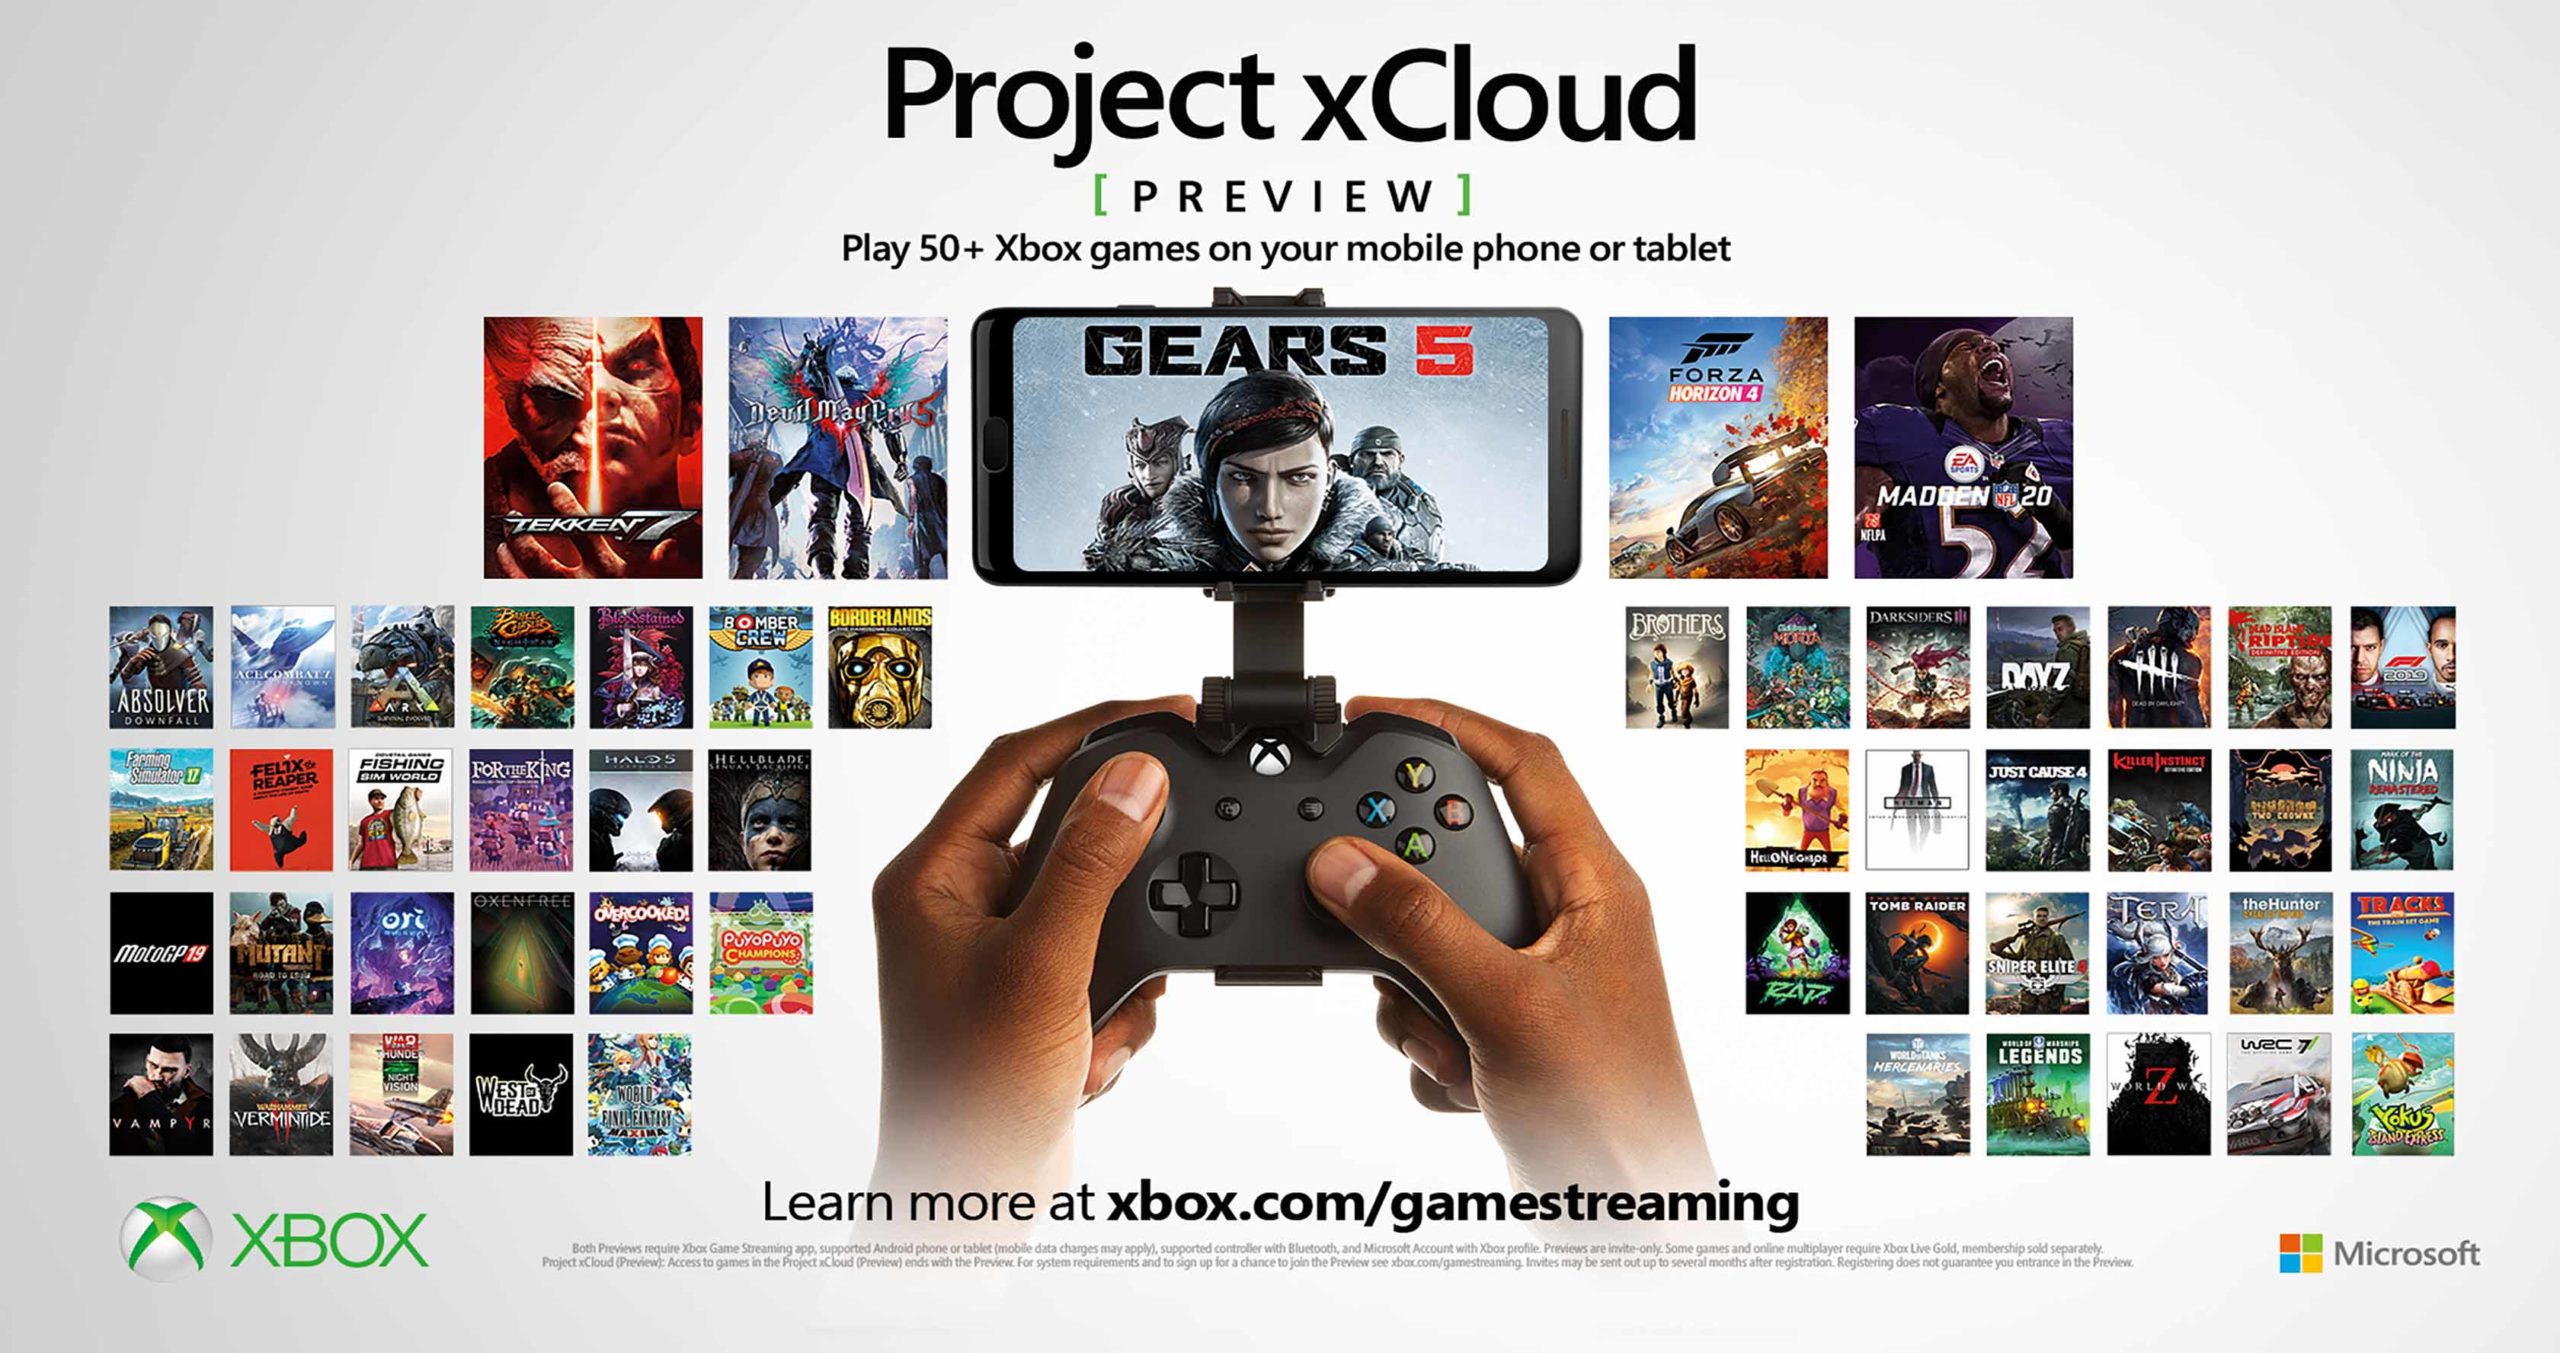 Project xCloud games